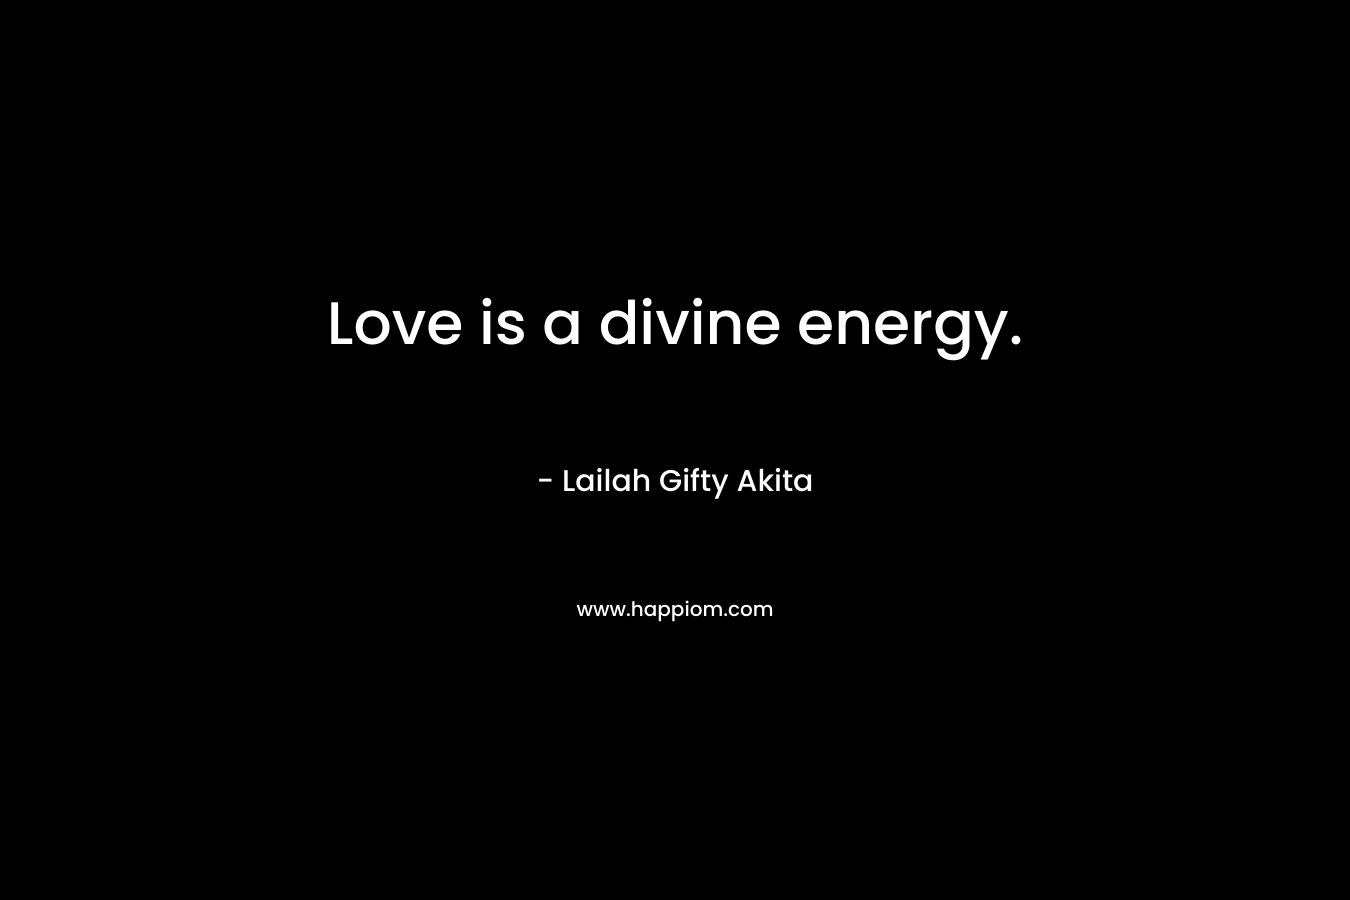 Love is a divine energy.